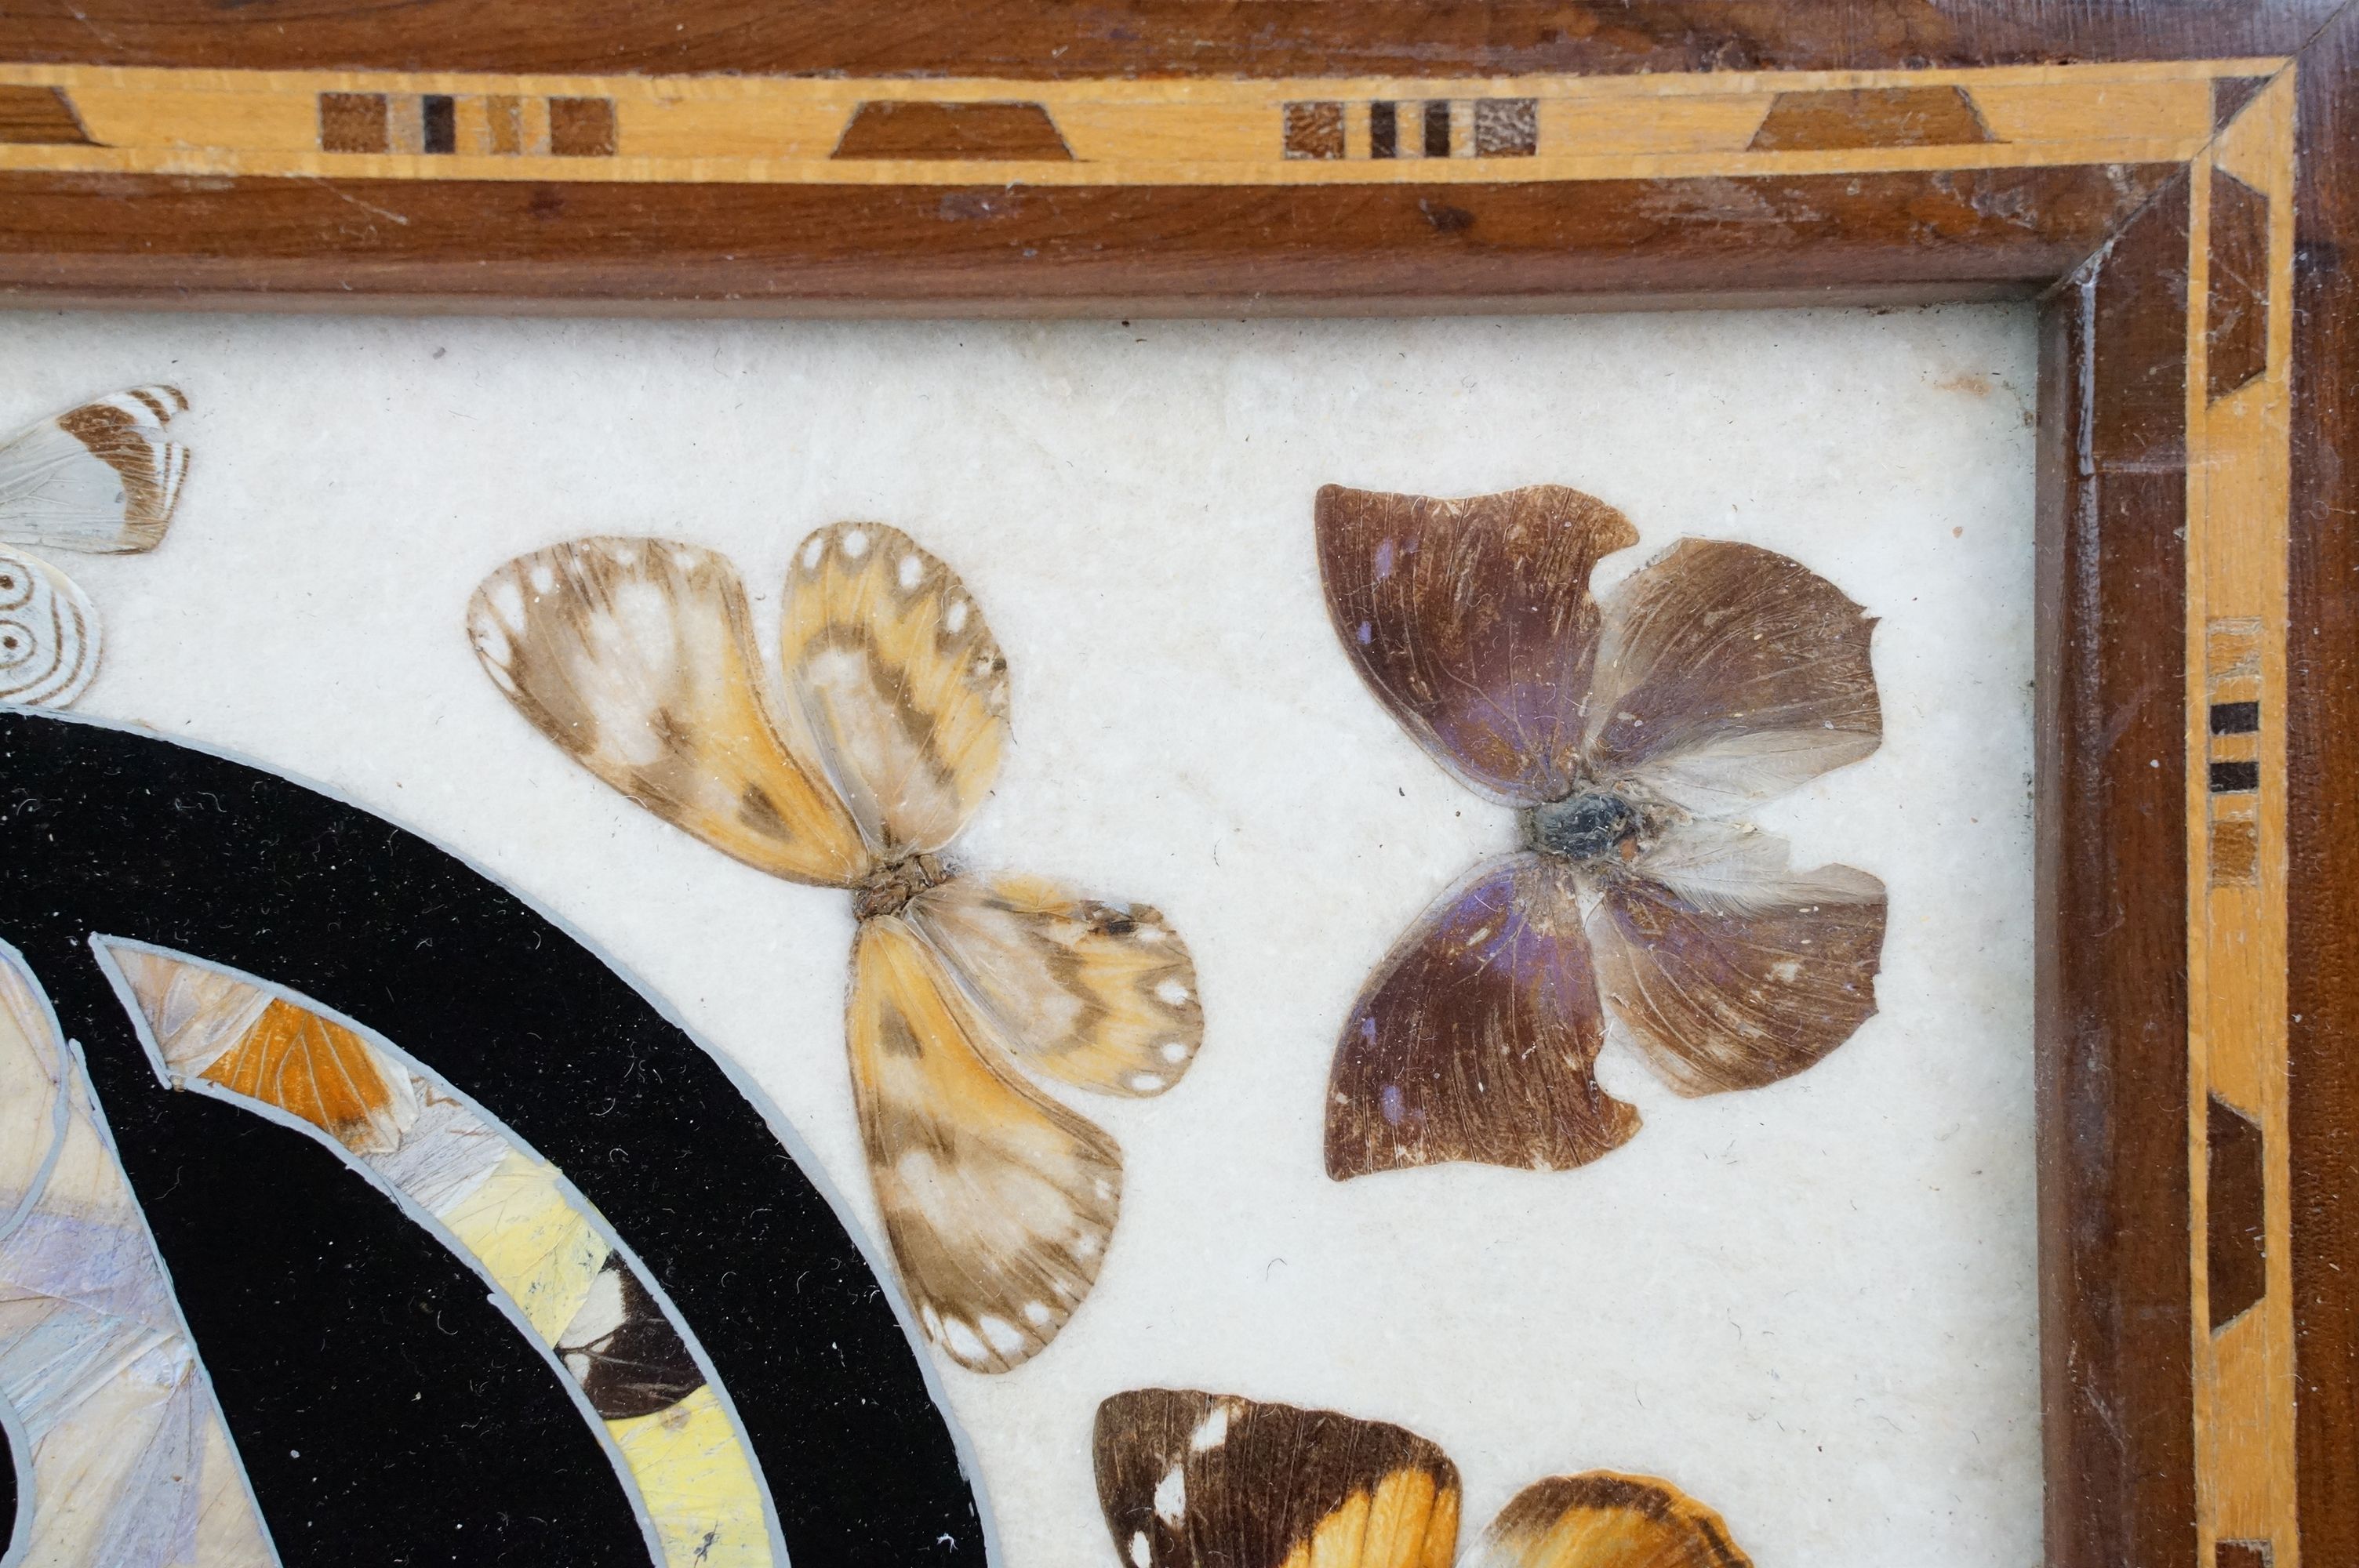 Early 20th century inlaid wooden tray with butterfly specimens and masonic butterfly wing emblem - Image 7 of 11